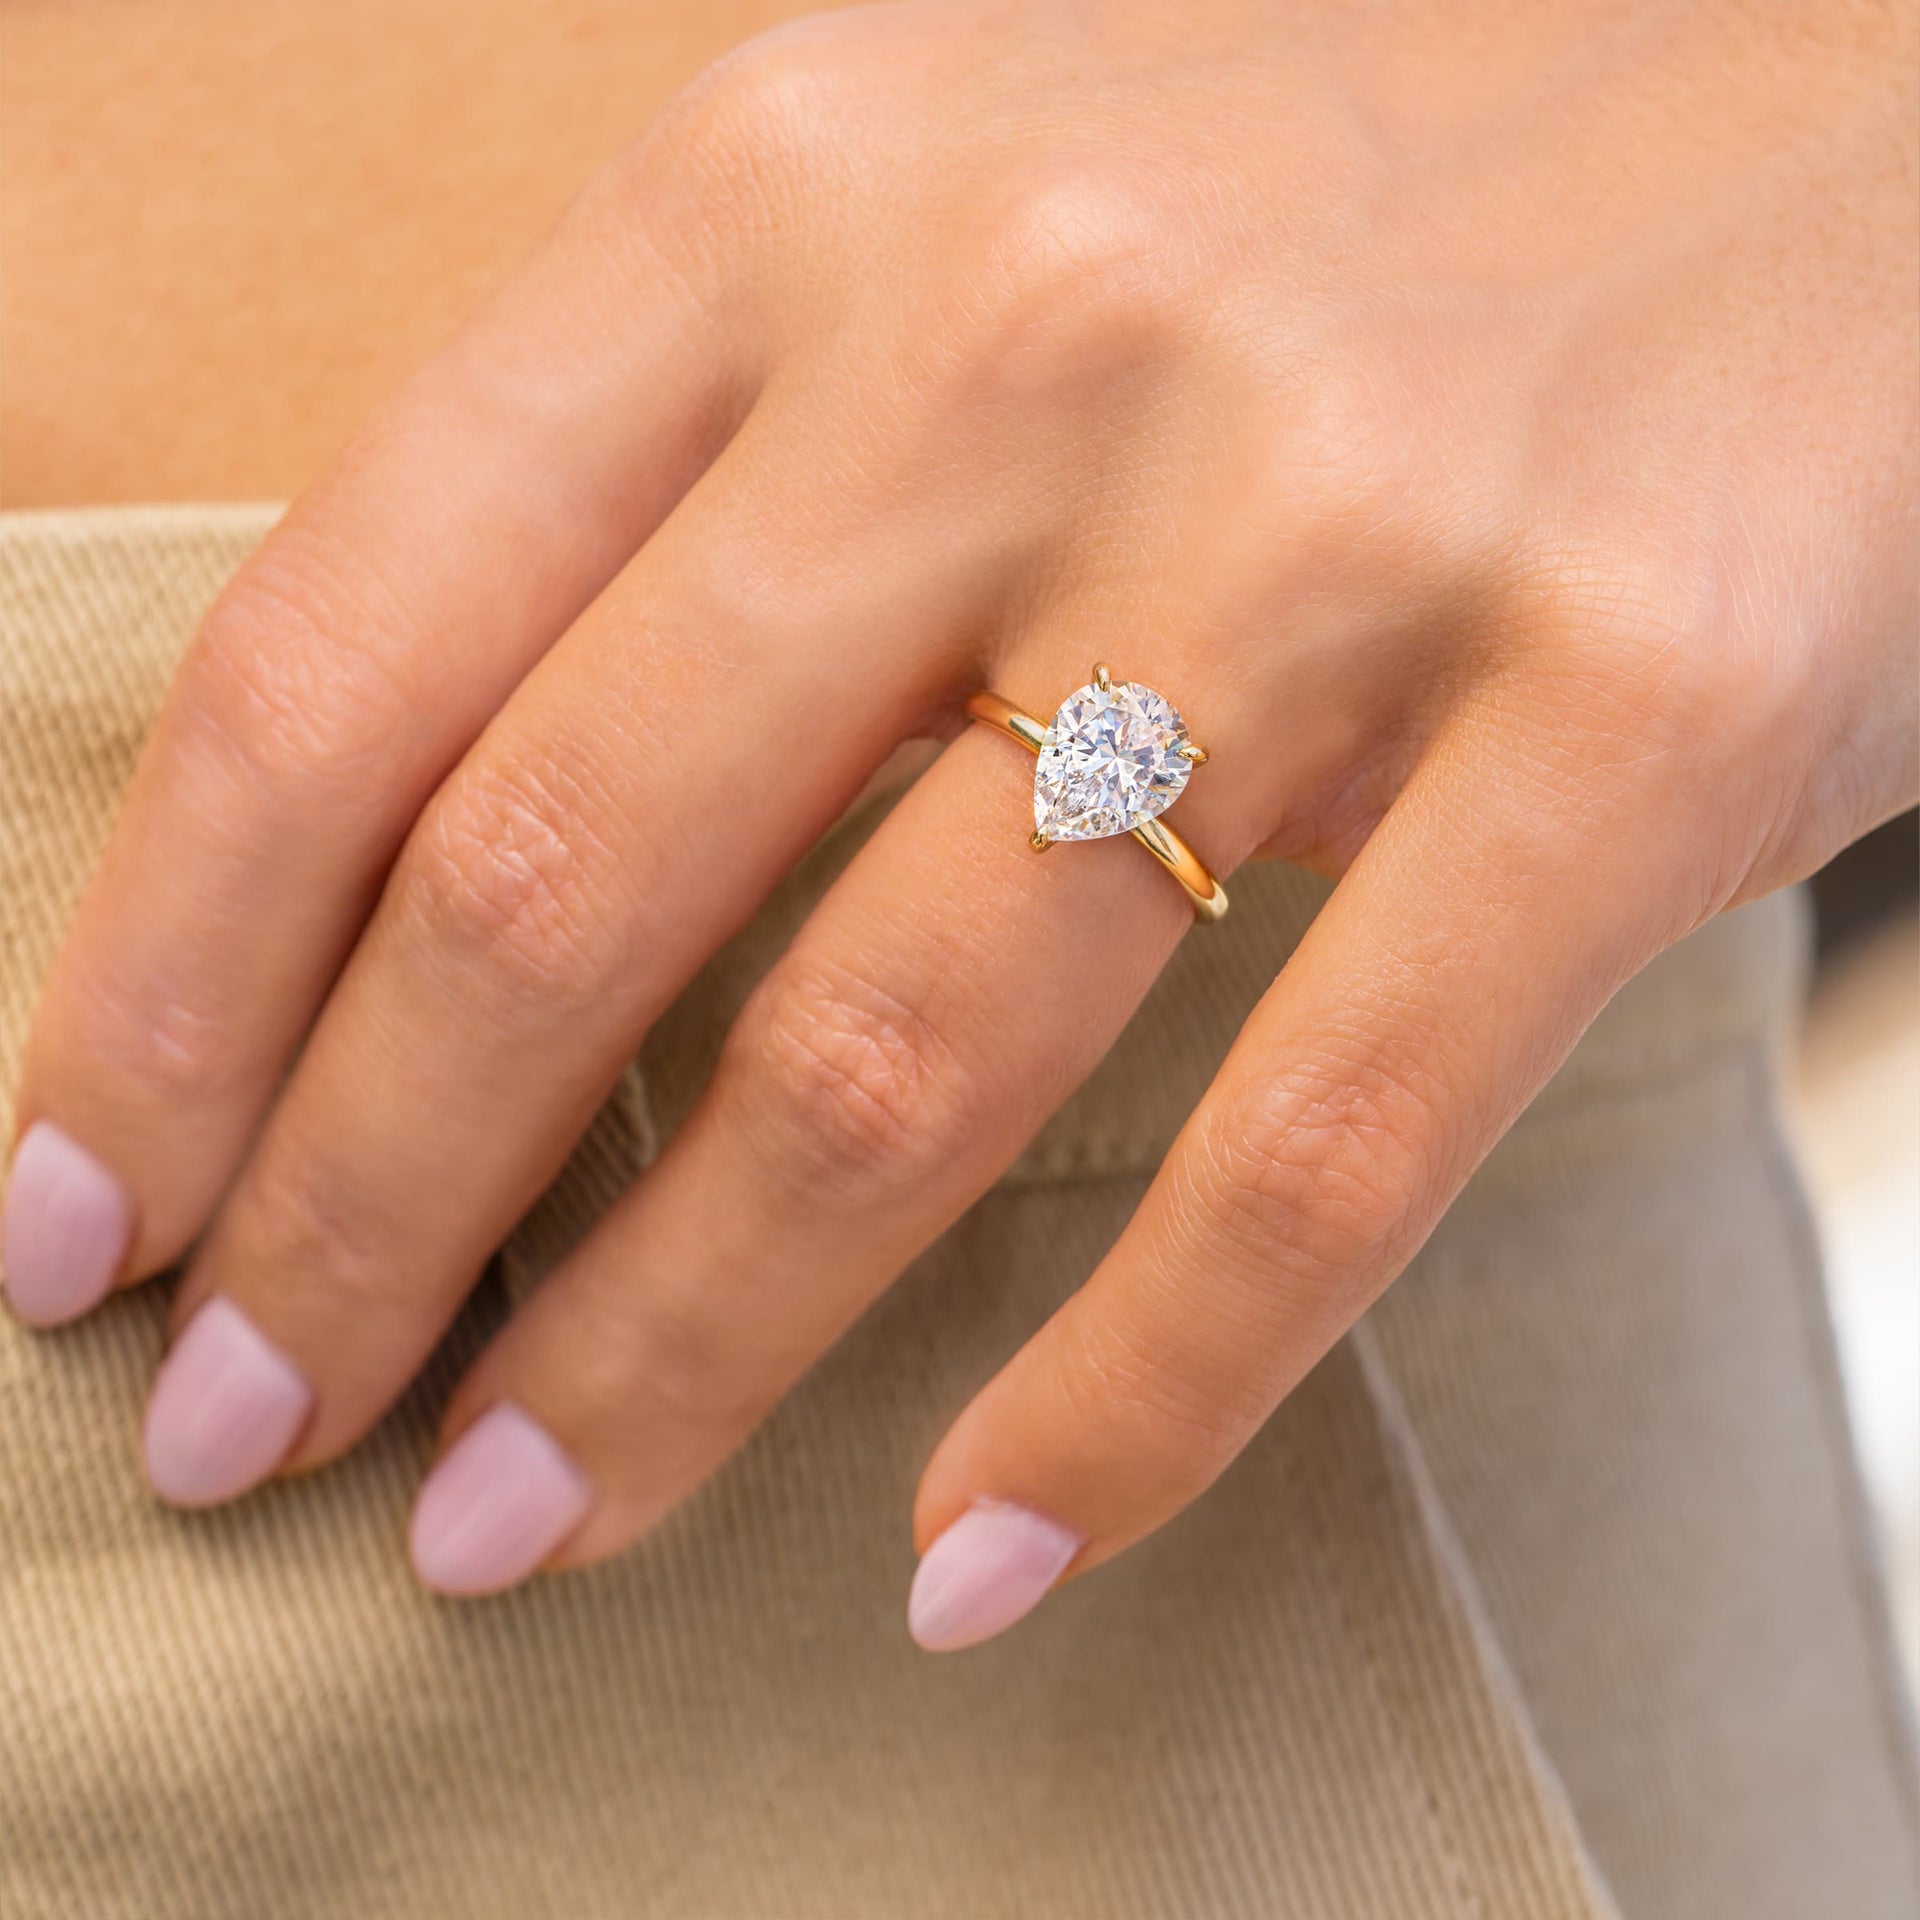 gold pear shaped engagement ring on woman's hand